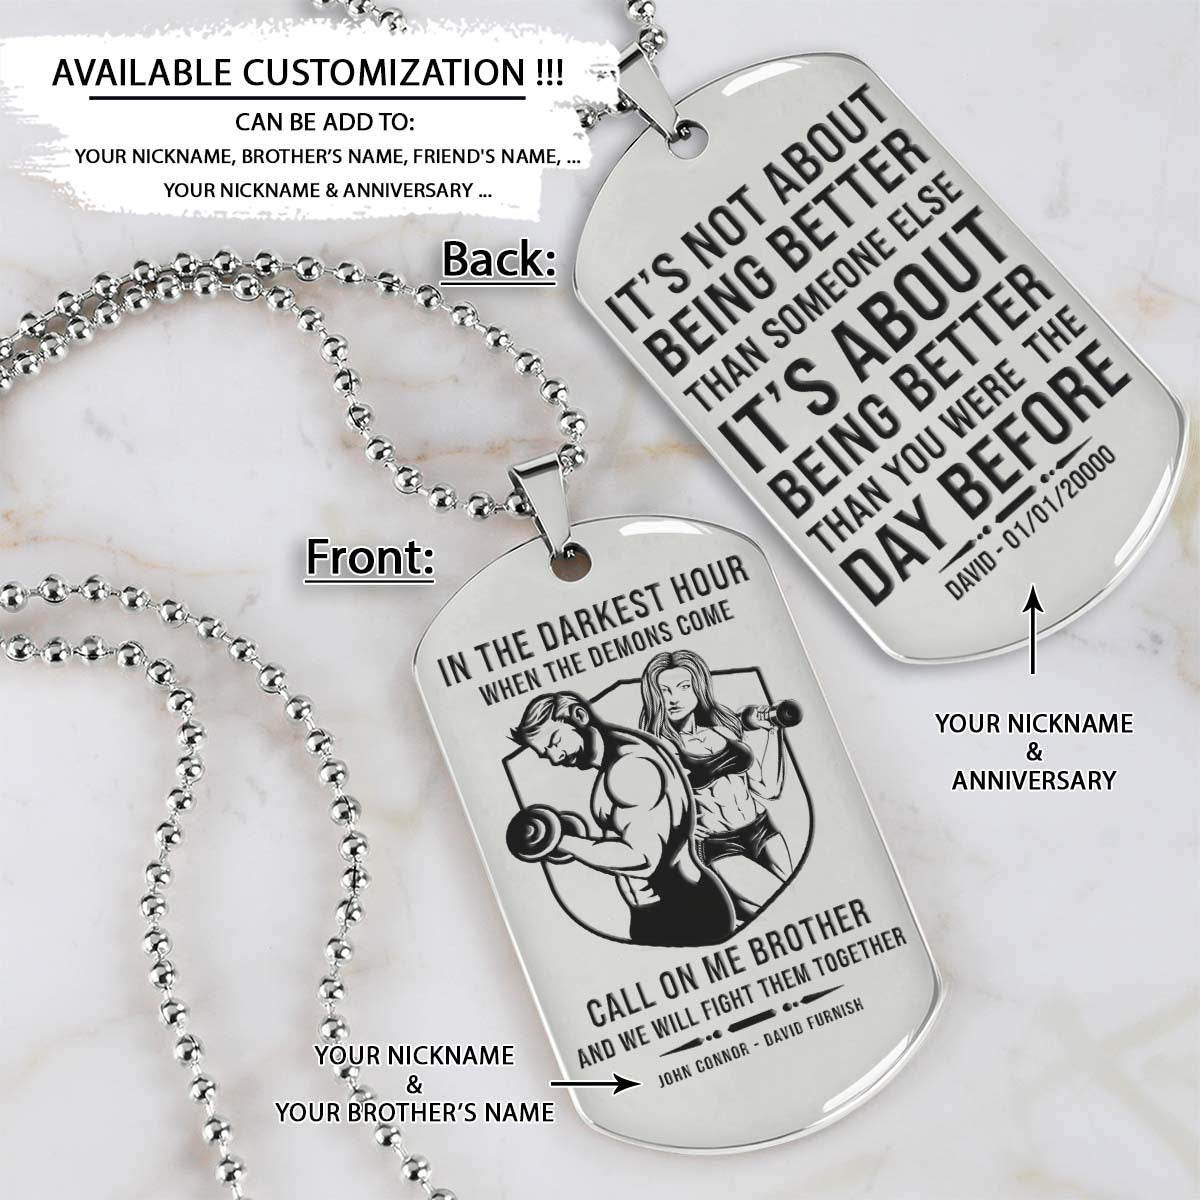 GYMD007 - Call On Me Brother - It's About Being Better Than You Were The Day Before - Gym - Fitness Center - Workout - Gym Dog Tag - Gym Necklace - Silver Engrave Dog Tag